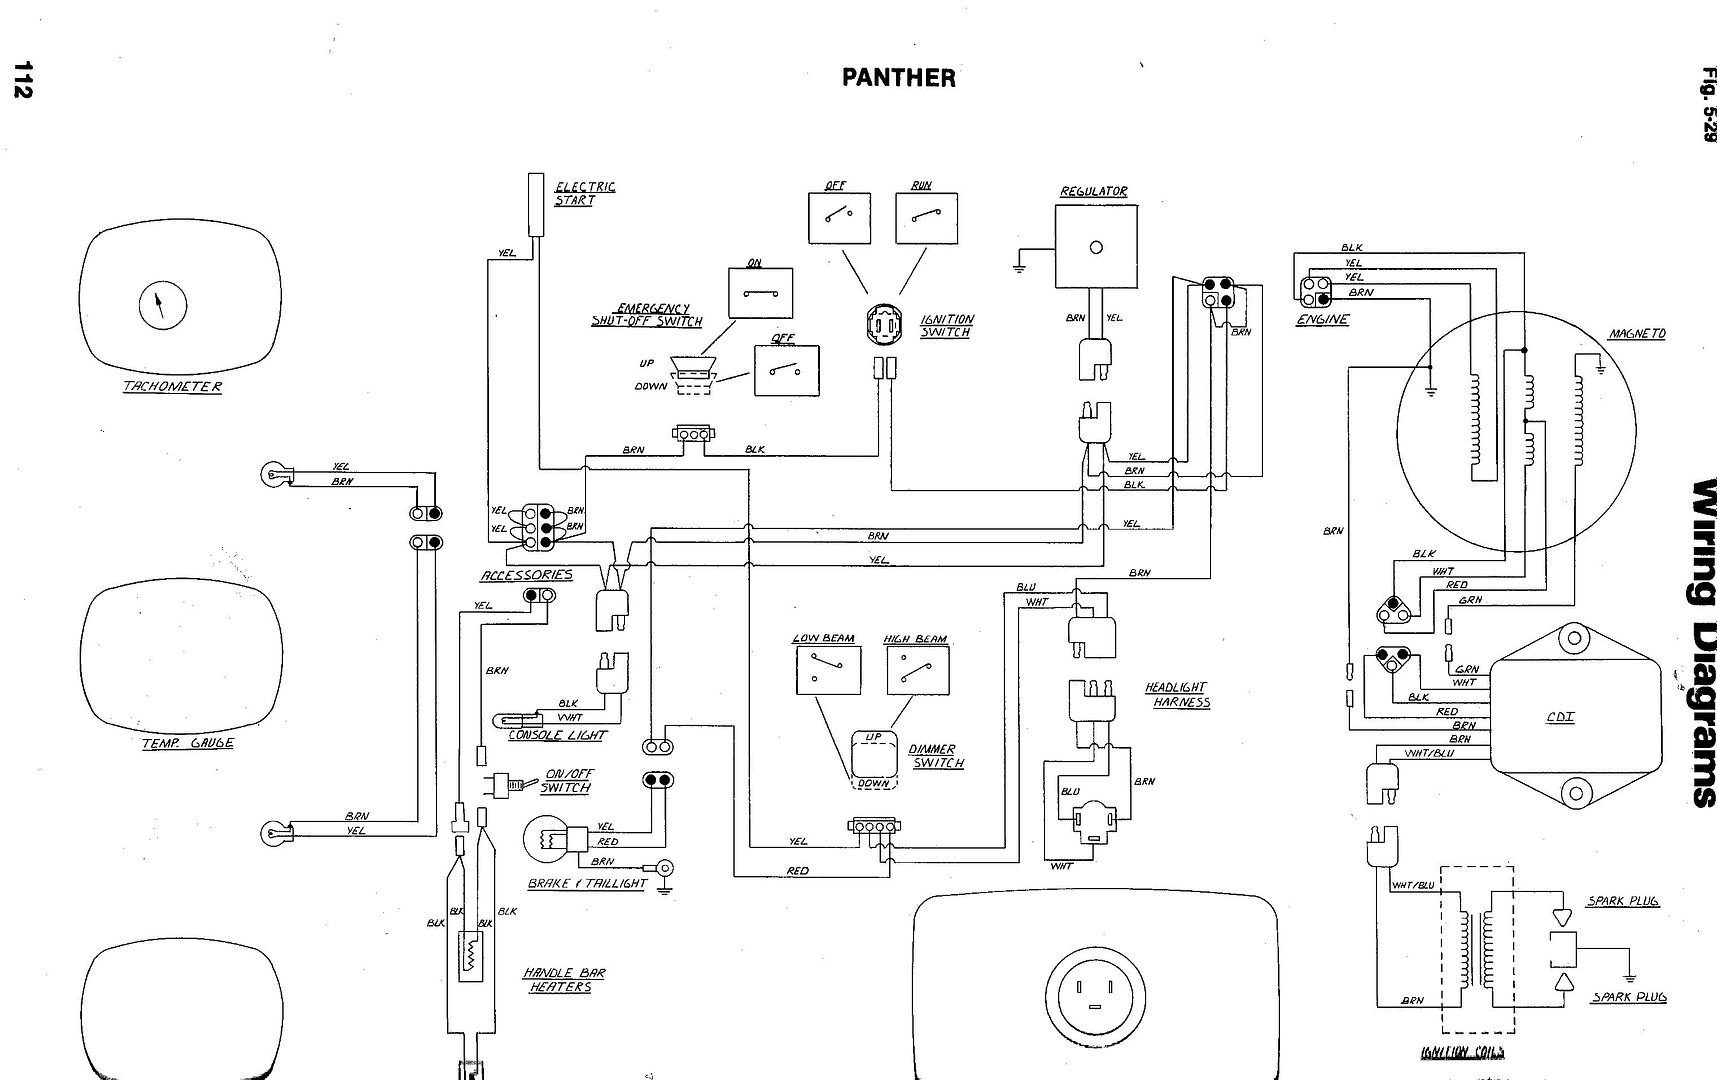 1971 Arctic Cat Wiring Diagram | Wiring Library